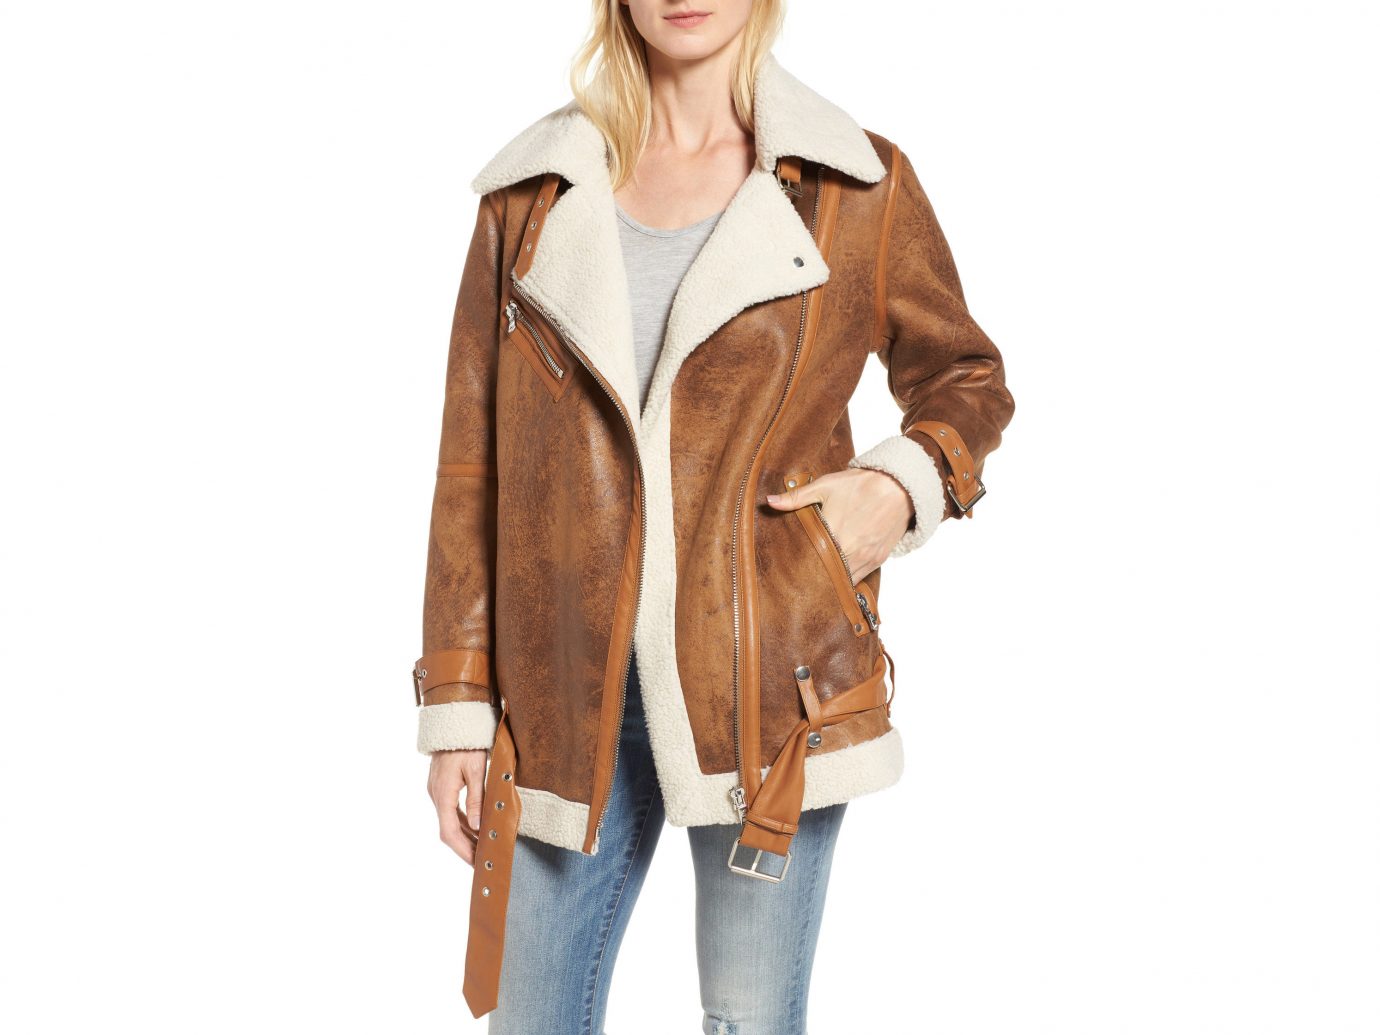 Fall Travel Style + Design Travel Shop Weekend Getaways person clothing coat jacket wearing fashion model leather jacket leather overcoat fur posing dressed